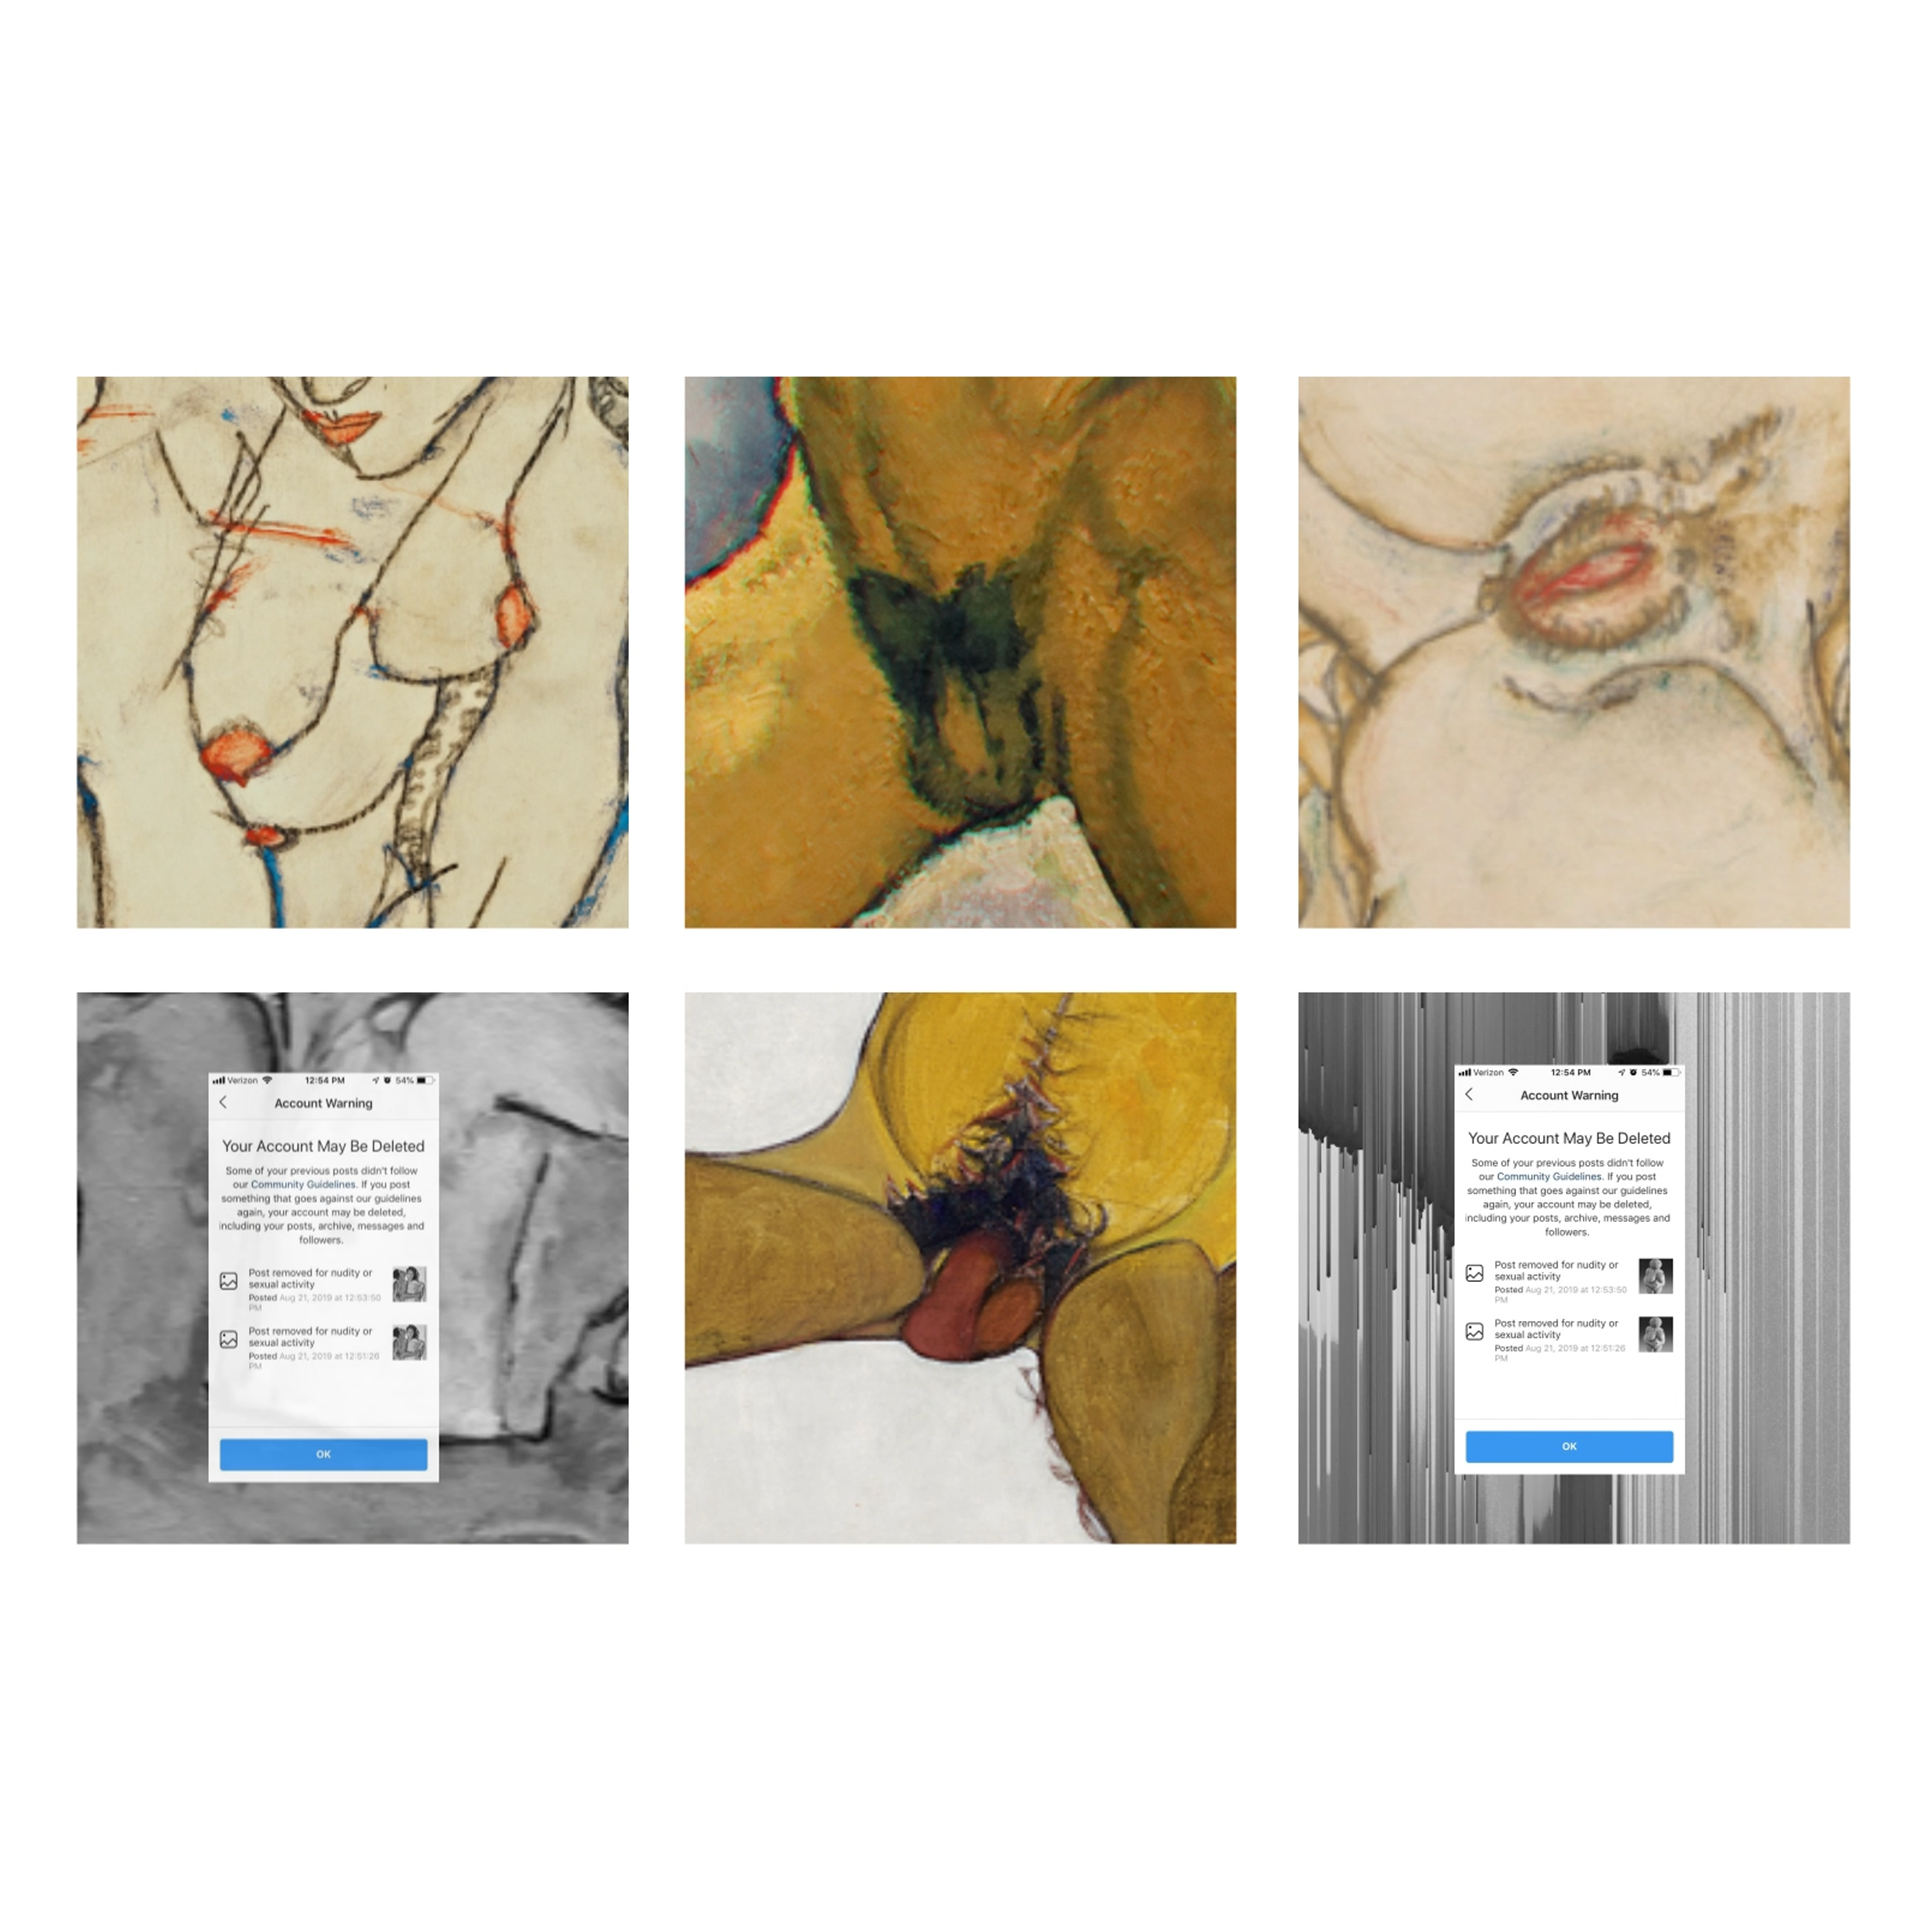 An image of six different iconic artworks showing nudity censored from social media for pornographic content, two images have the account warning: "Your account may be deleted"